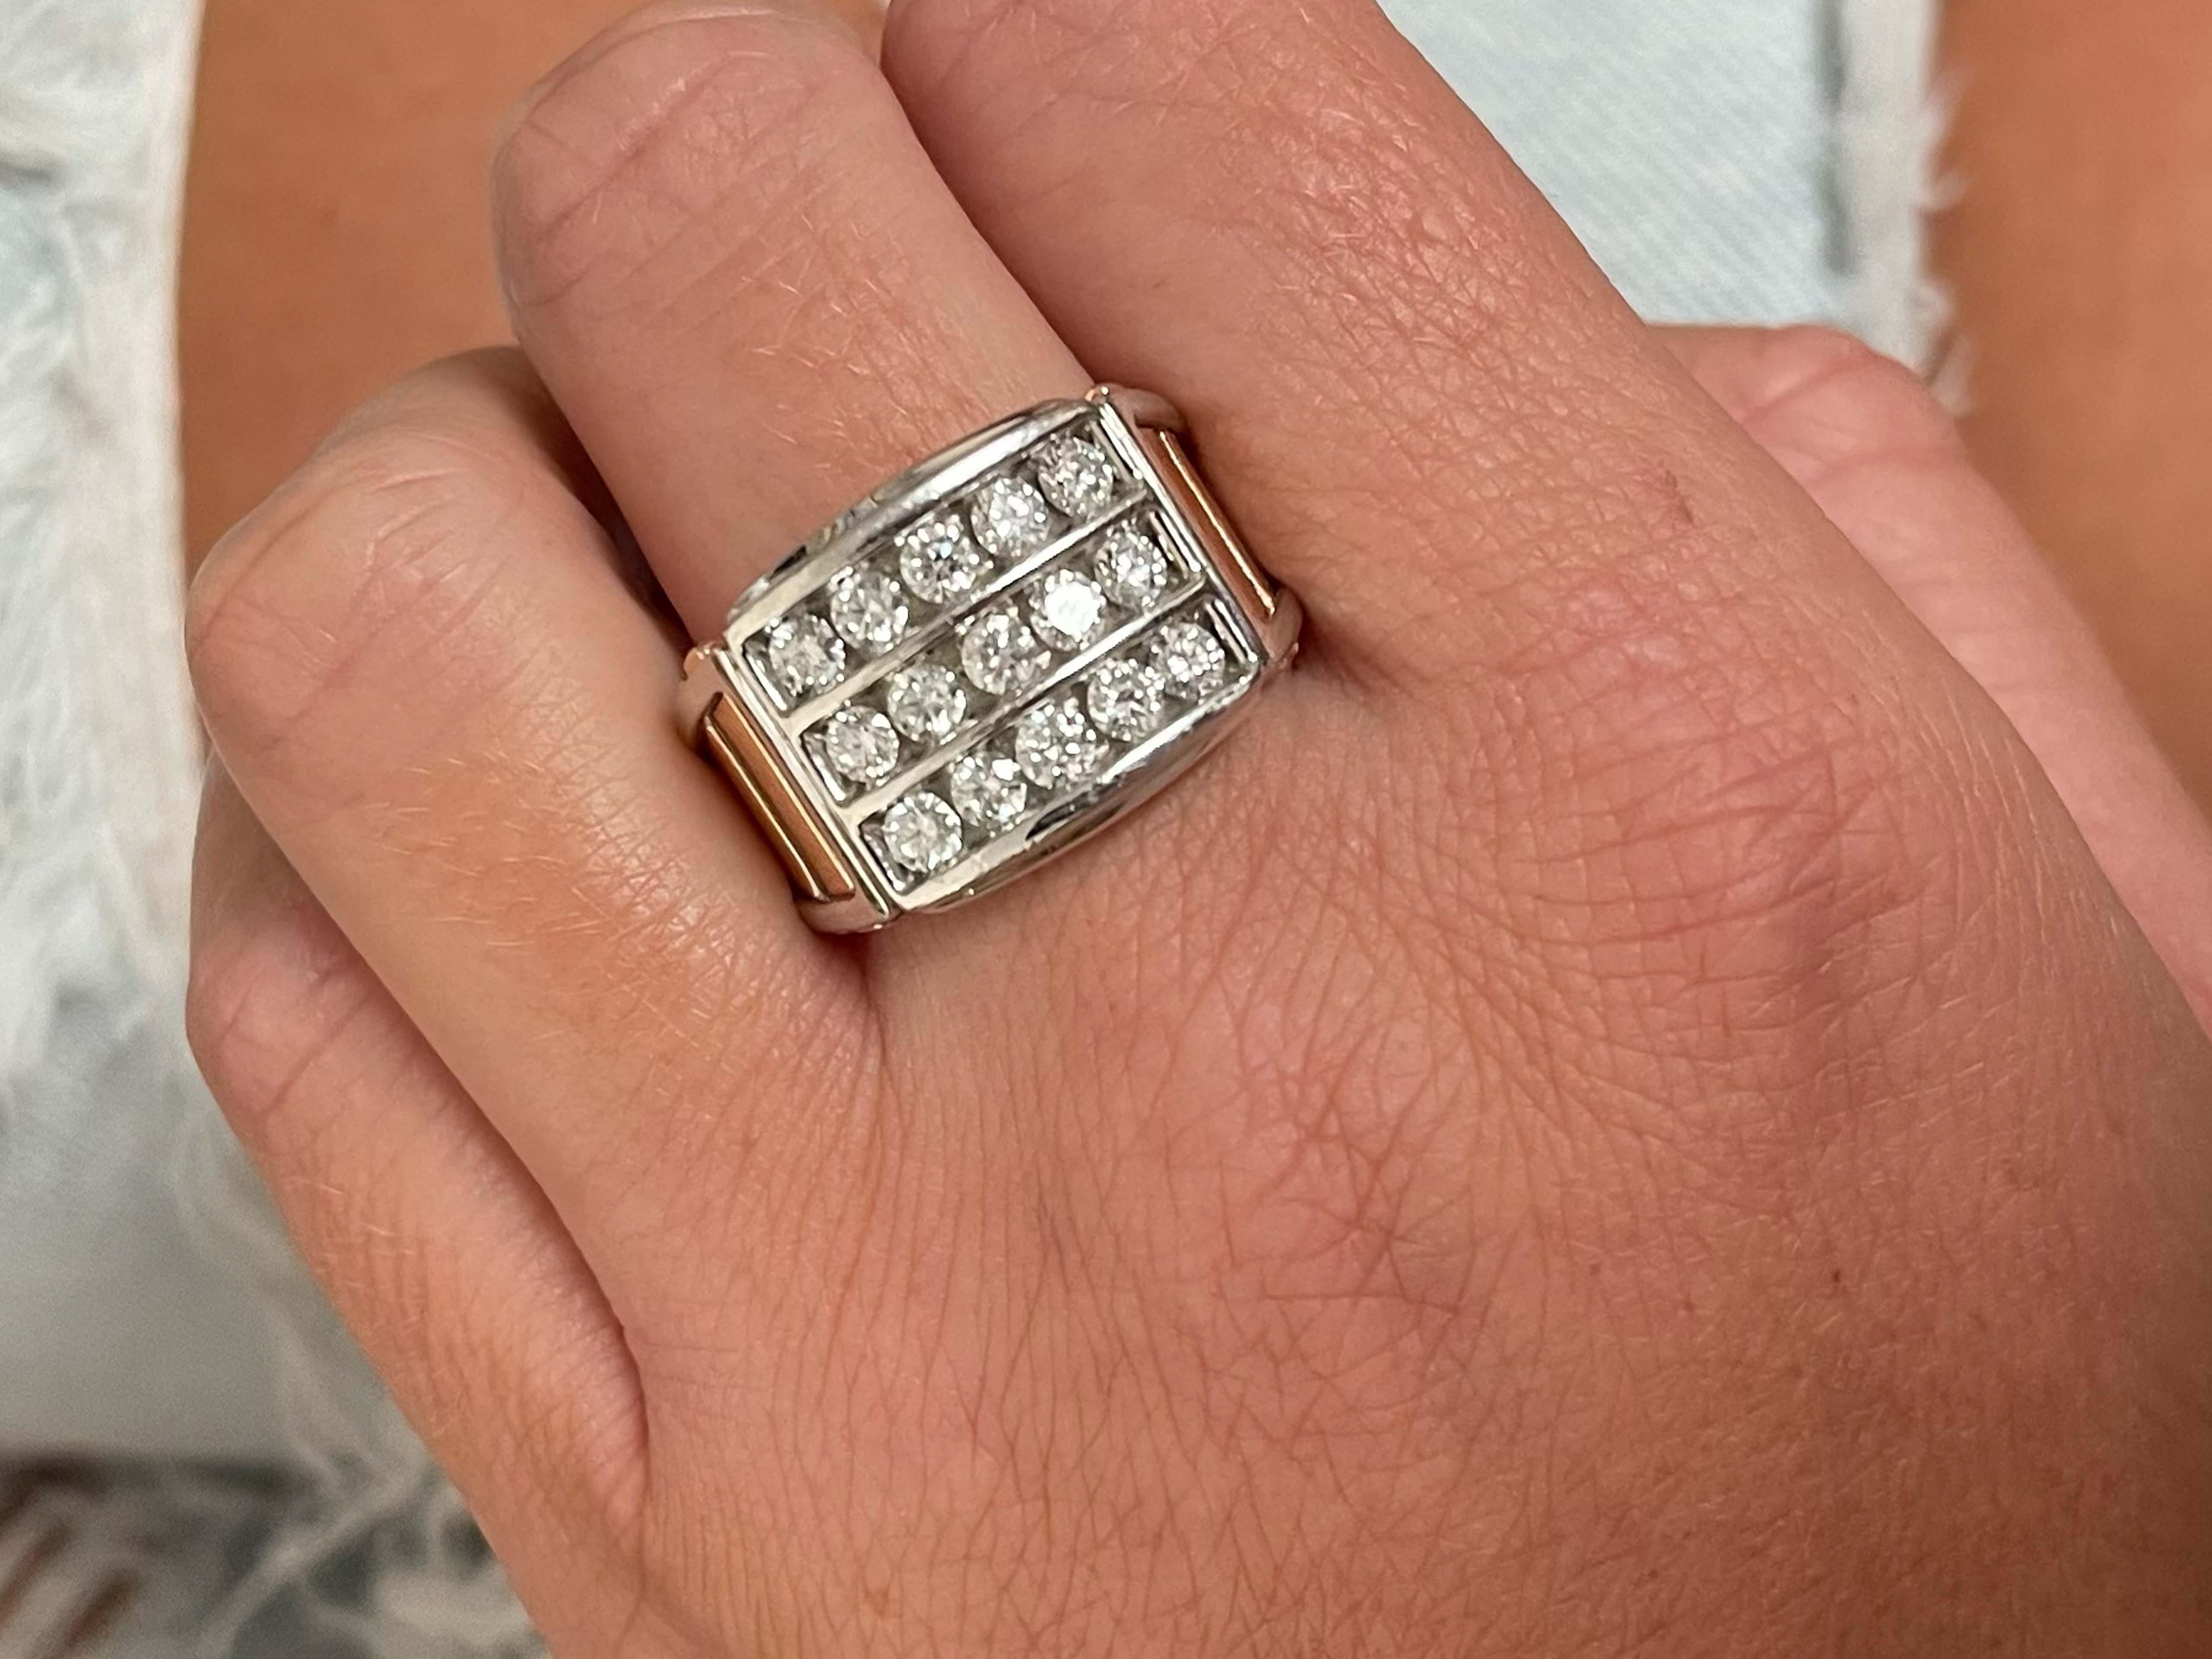 Item Specifications:

Metal: 14K White & Rose Gold

Style: Statement Ring

Ring Size: 9 (resizing available for a fee)

Total Weight: 13.30 Grams

Ring Width: 15.3 mm

Diamond Carat Weight: ~1.50 carats

Diamond Color: G-H

Diamond Clarity: